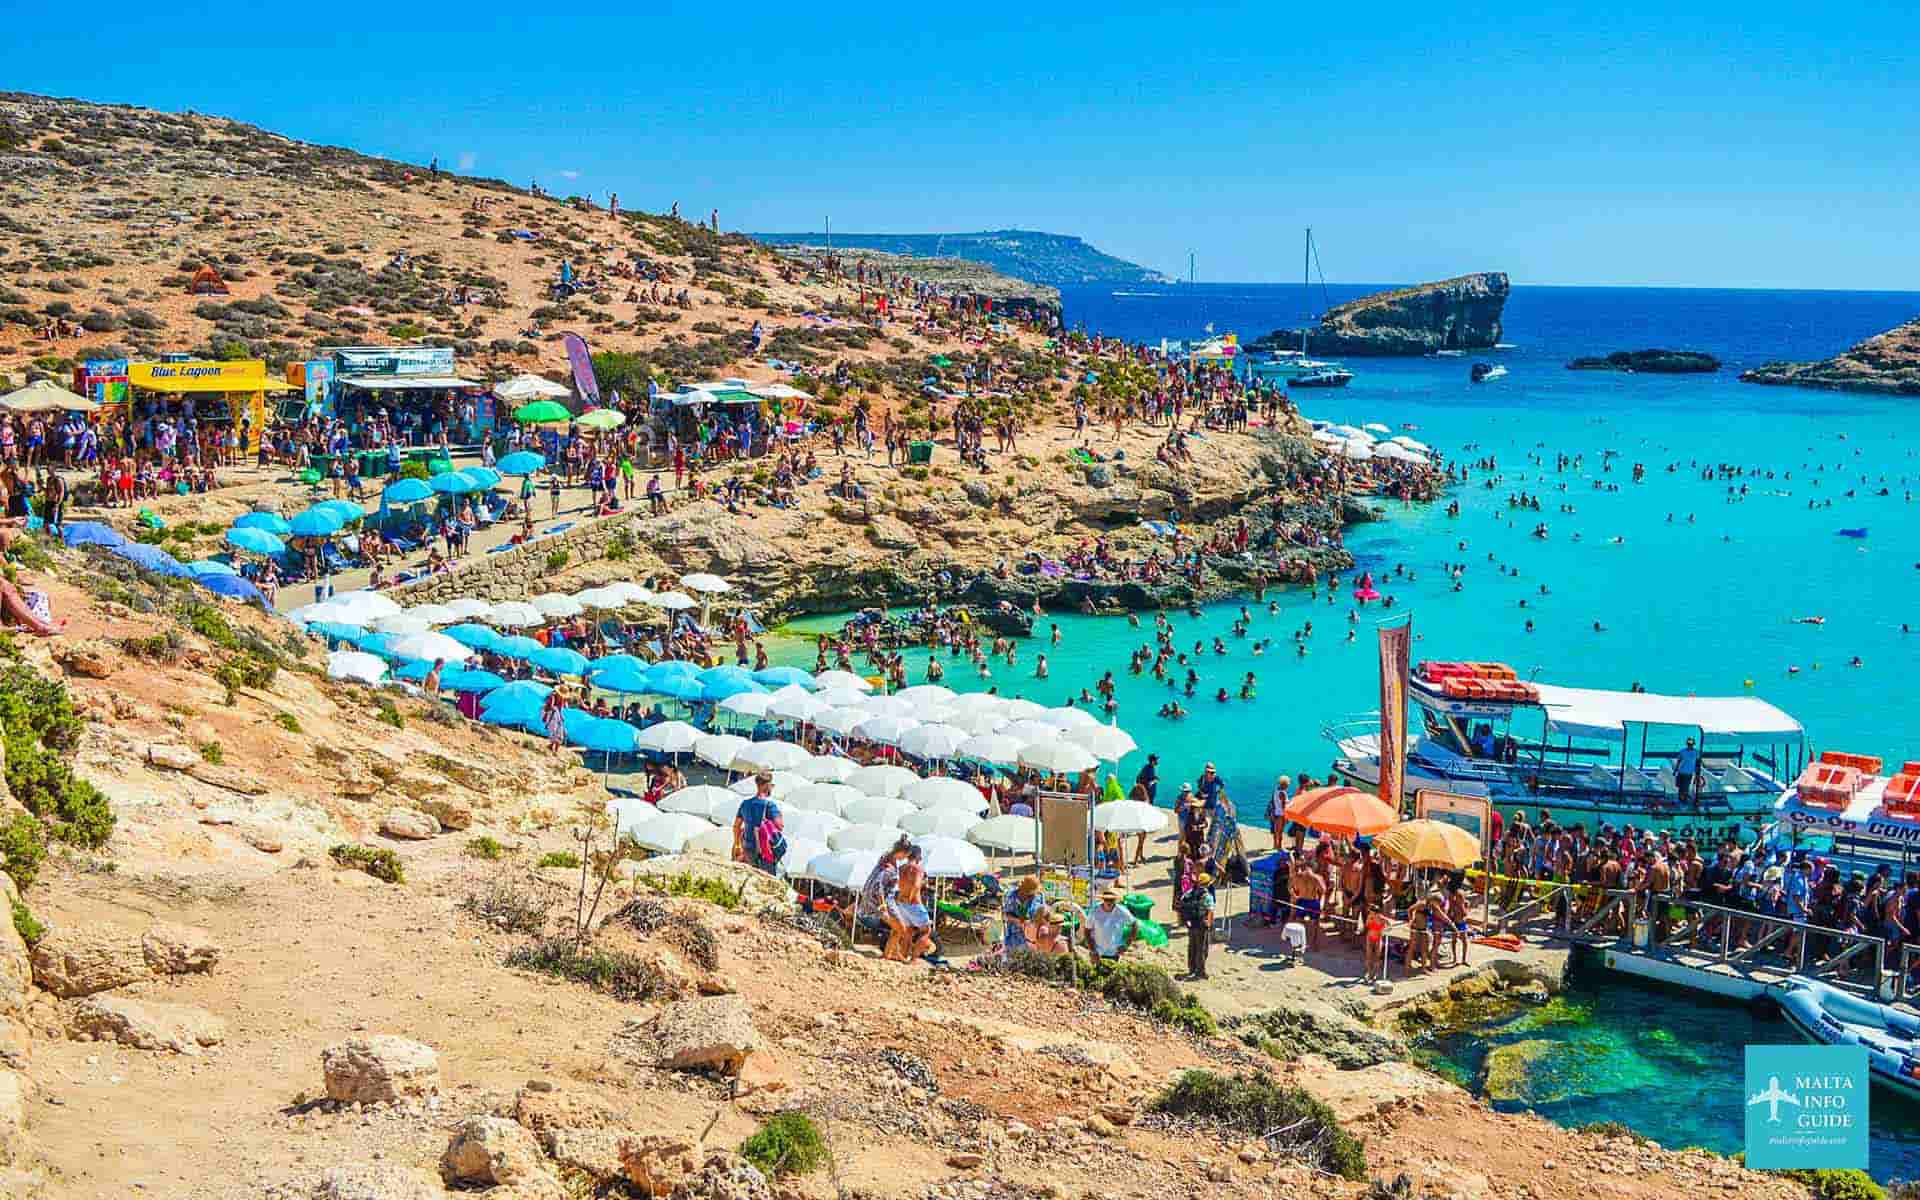 Blue Lagoon Malta is full of people swimming in the crystal clear sea.